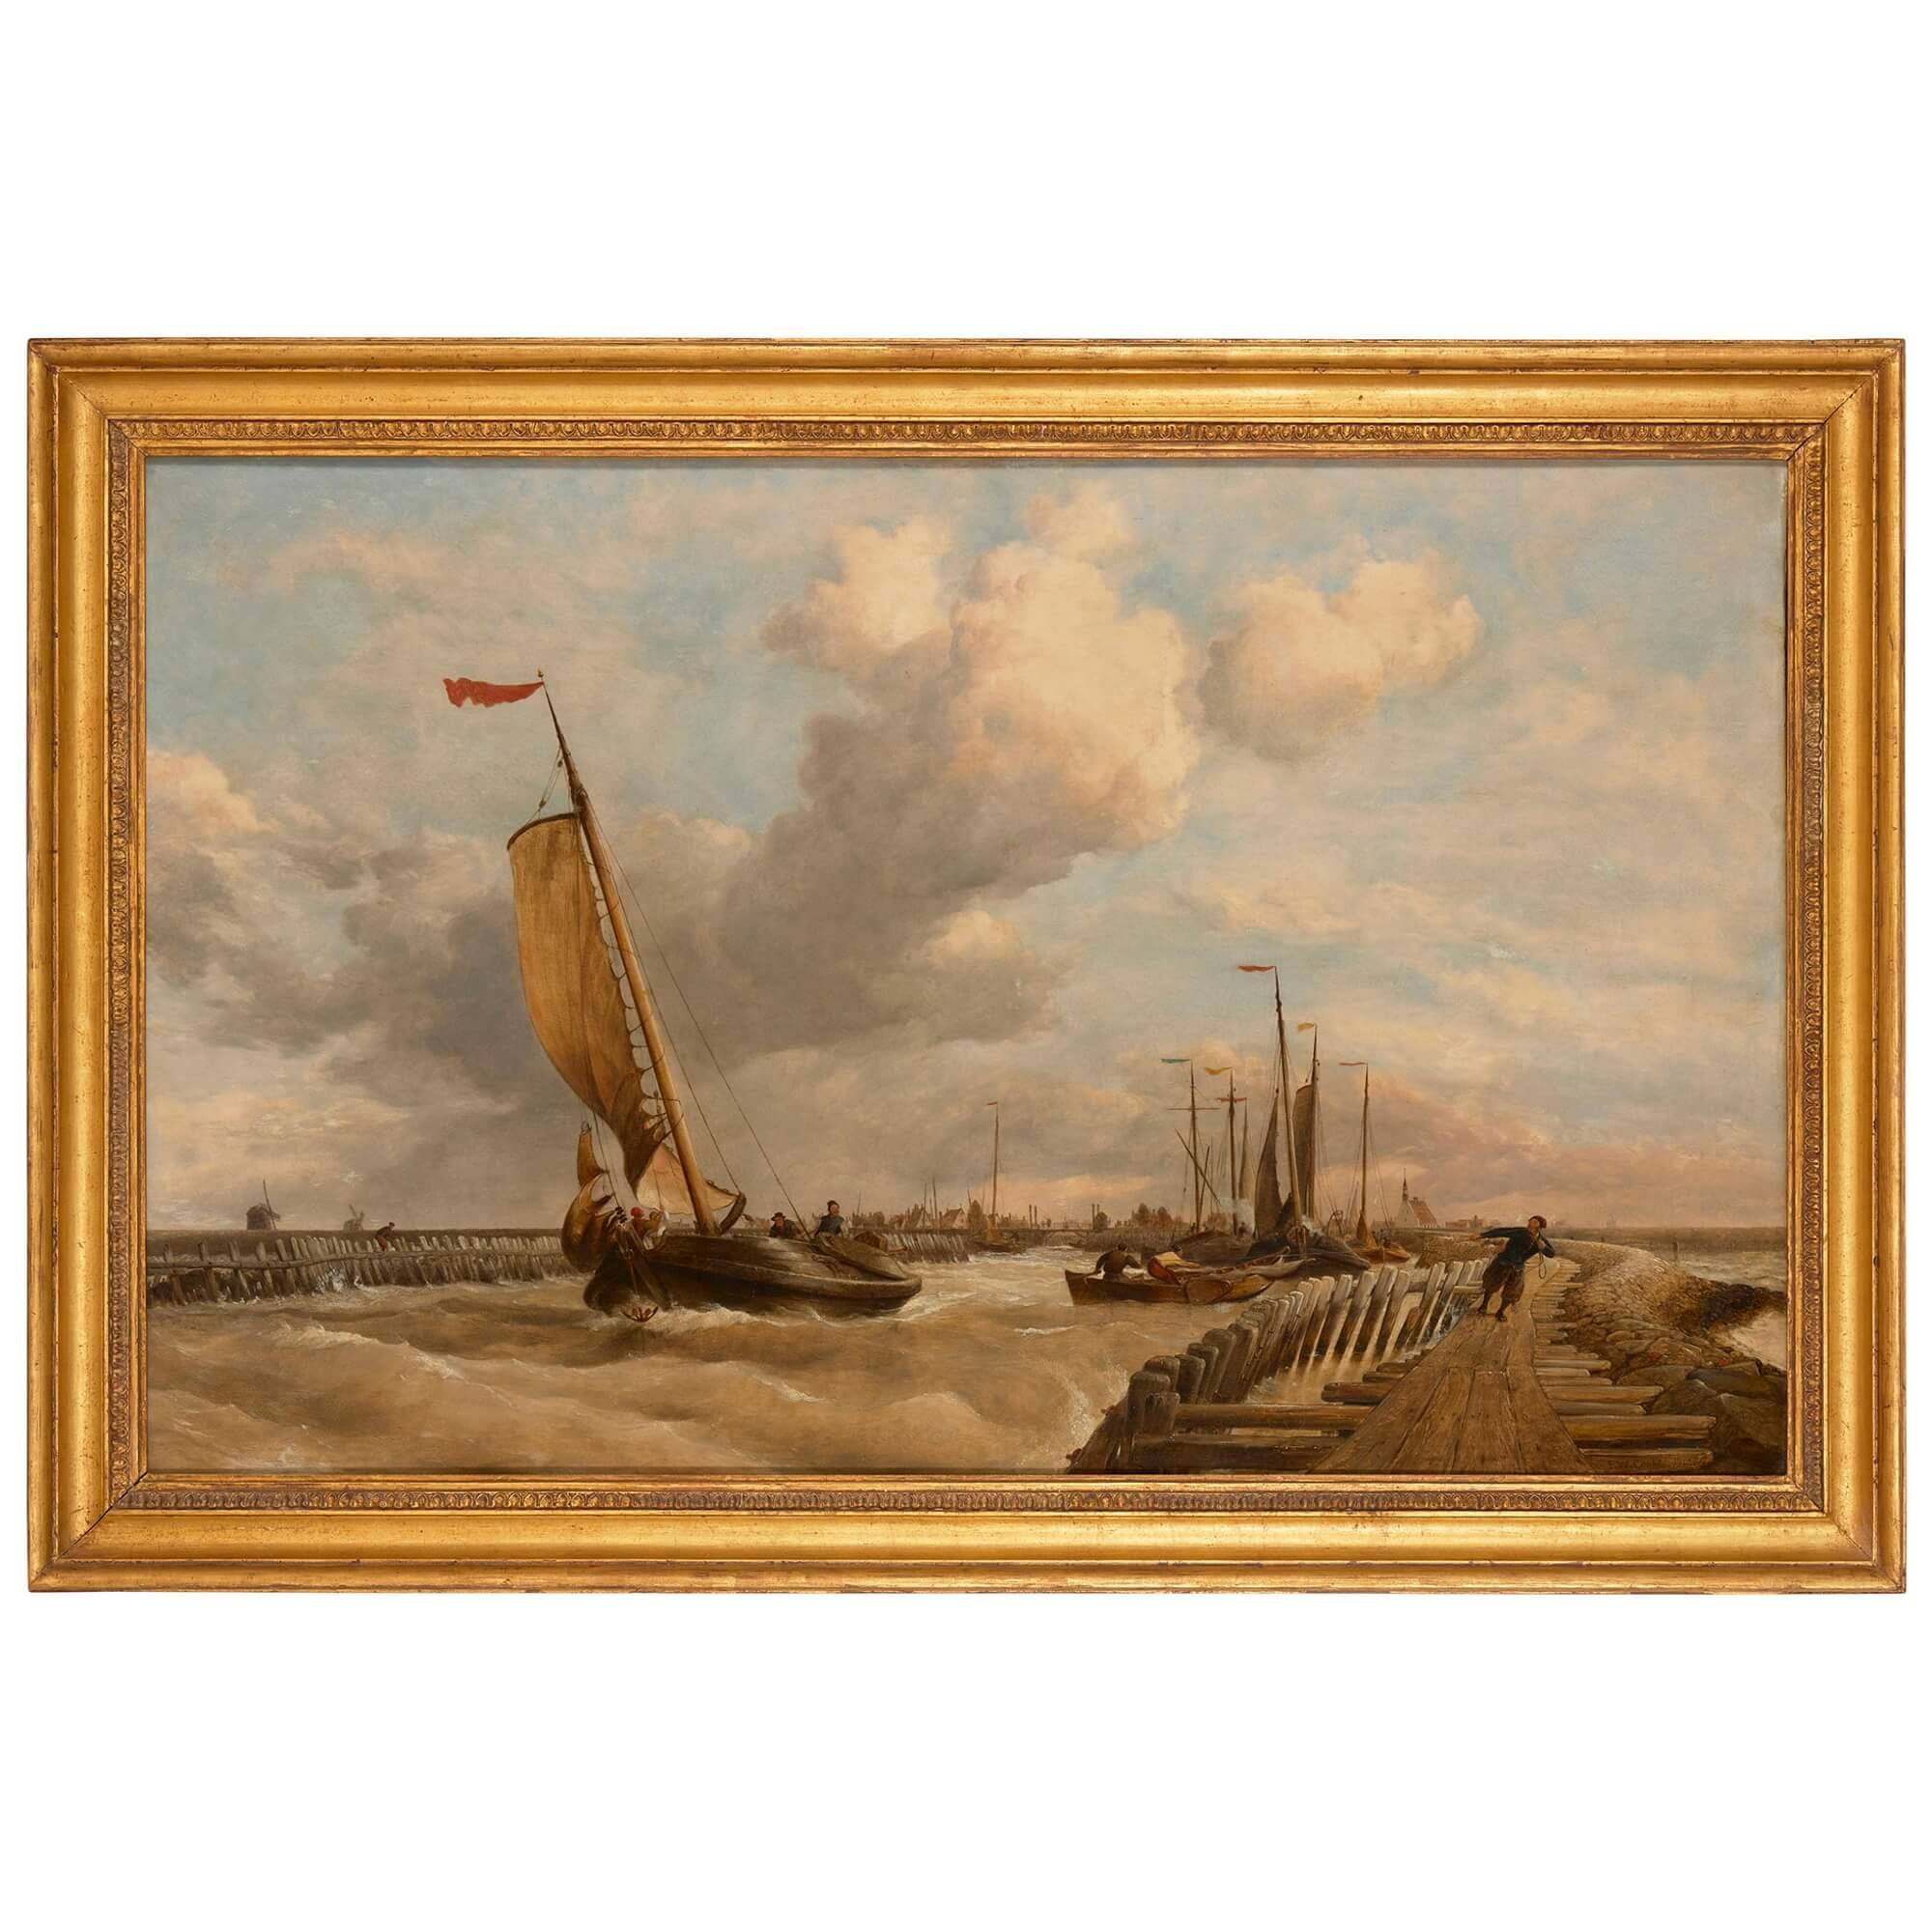 Large Victorian coastal marine painting by Edward William Cooke, R.A.